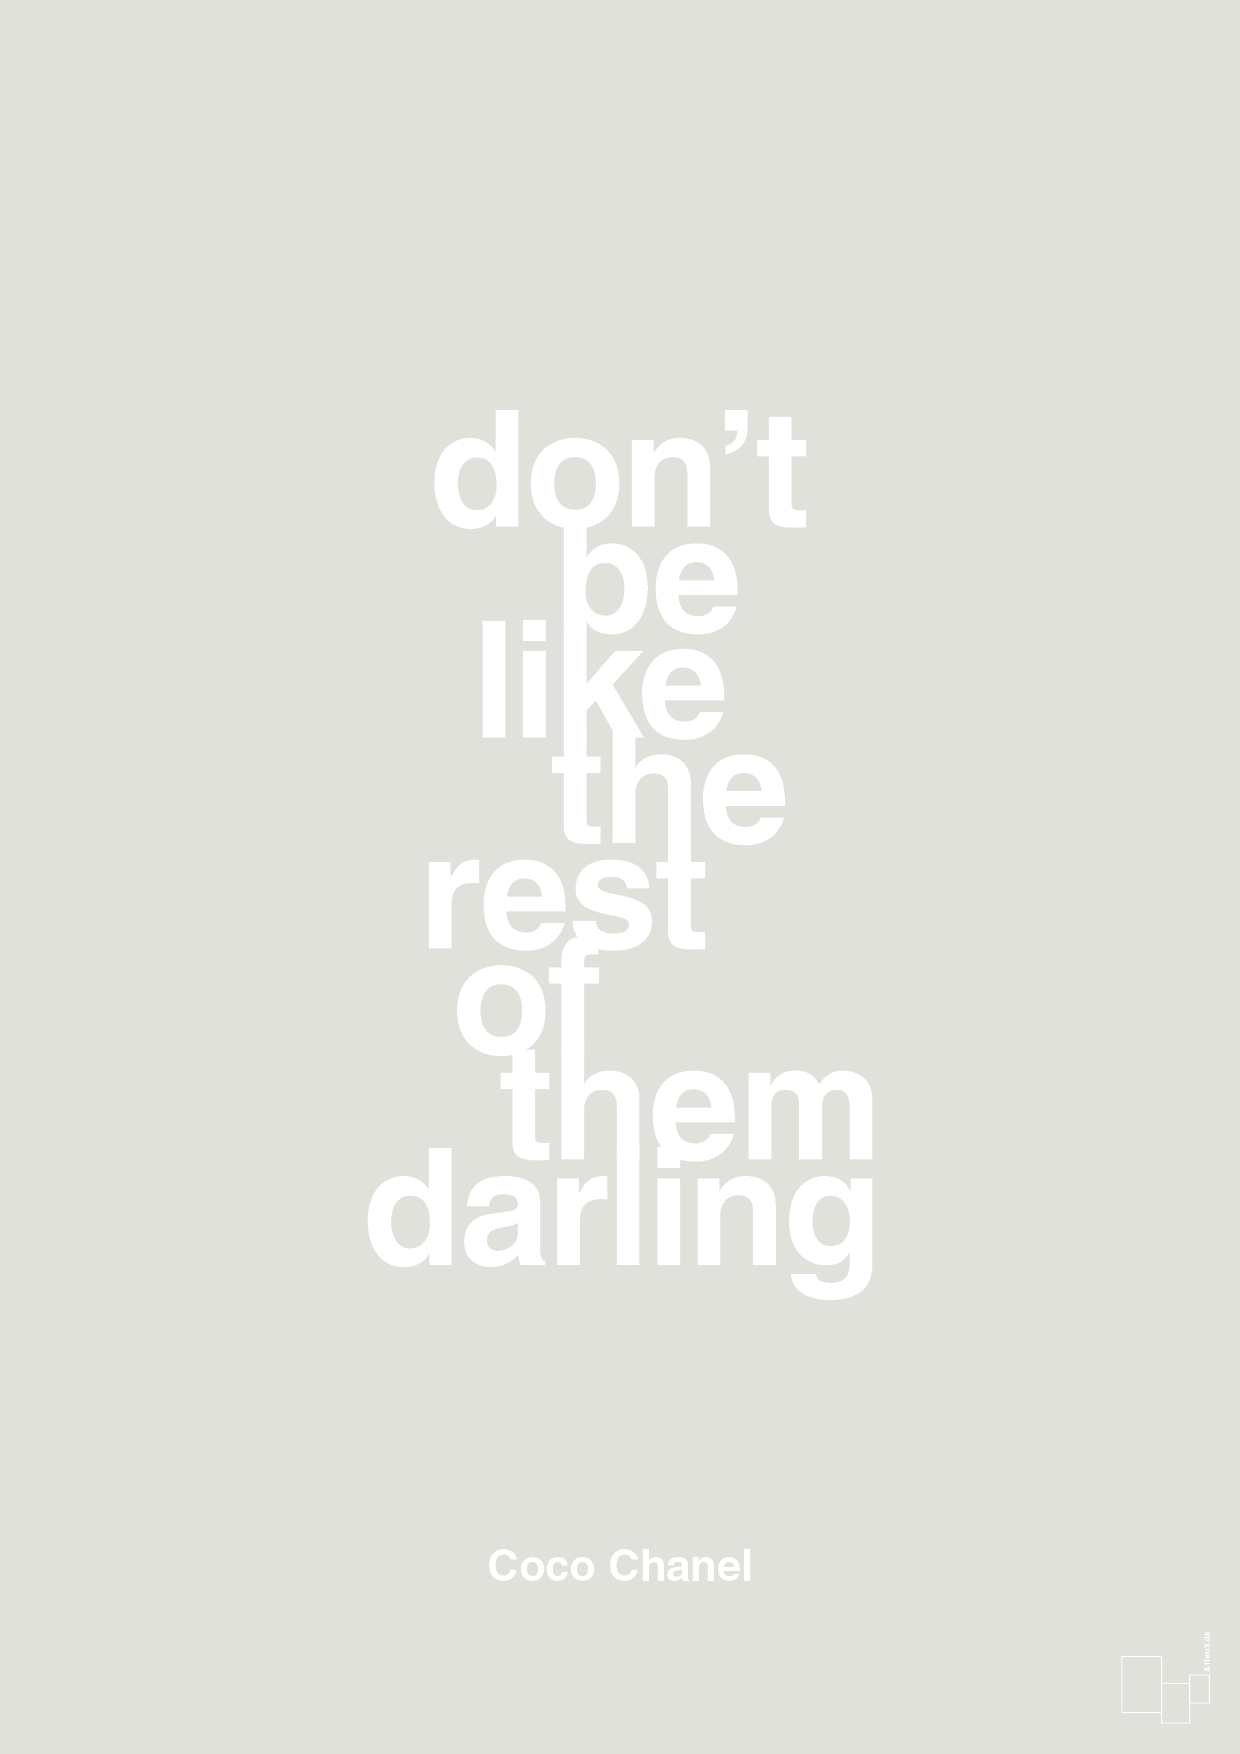 don’t be like the rest of them darling - Plakat med Citater i Painters White